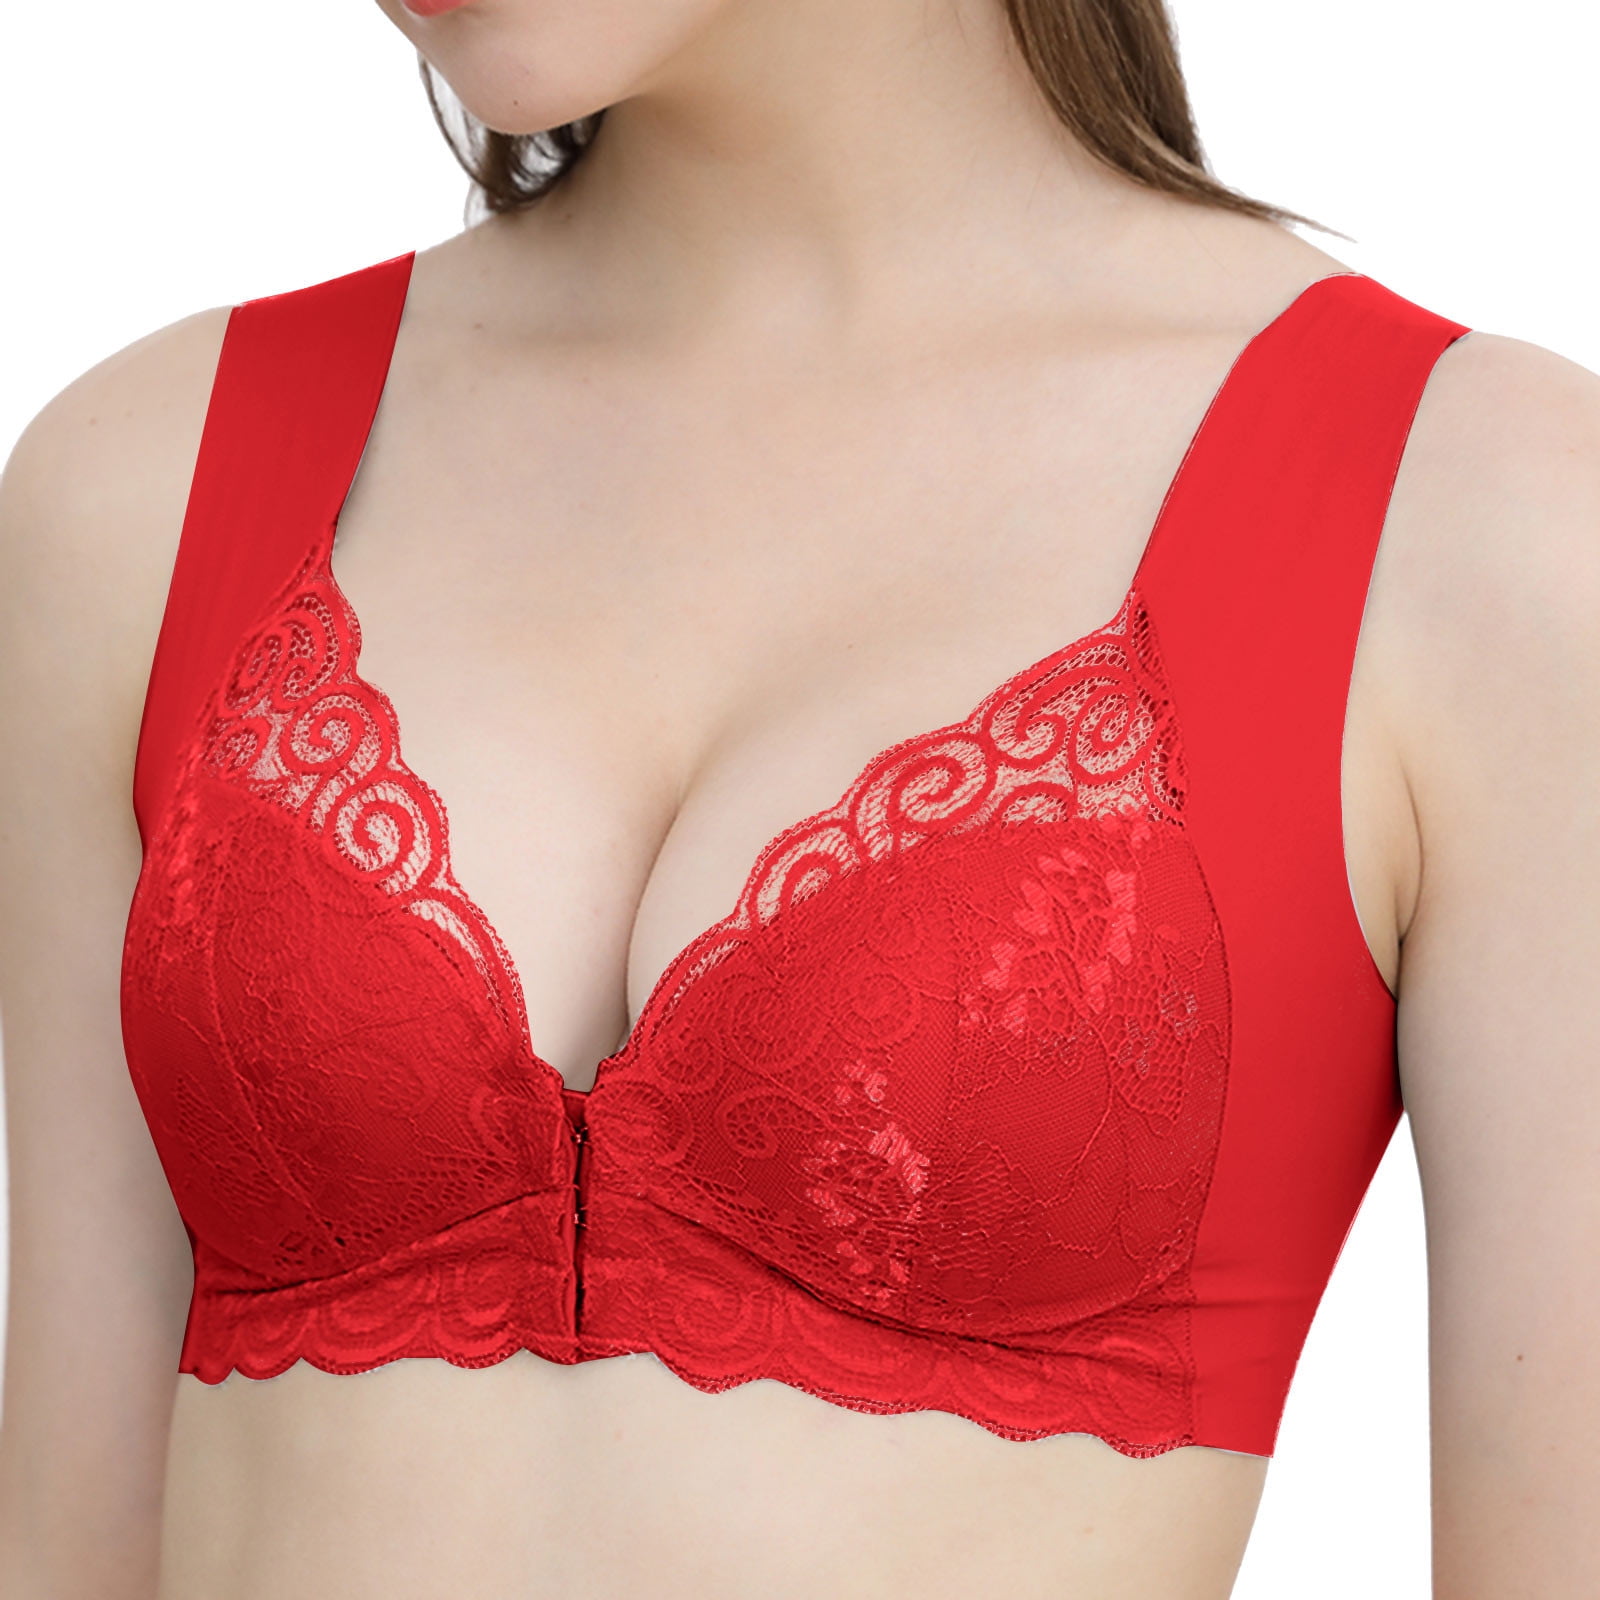 Strapless Bras For Women For Large Breasts Full Cup Thin Underwear